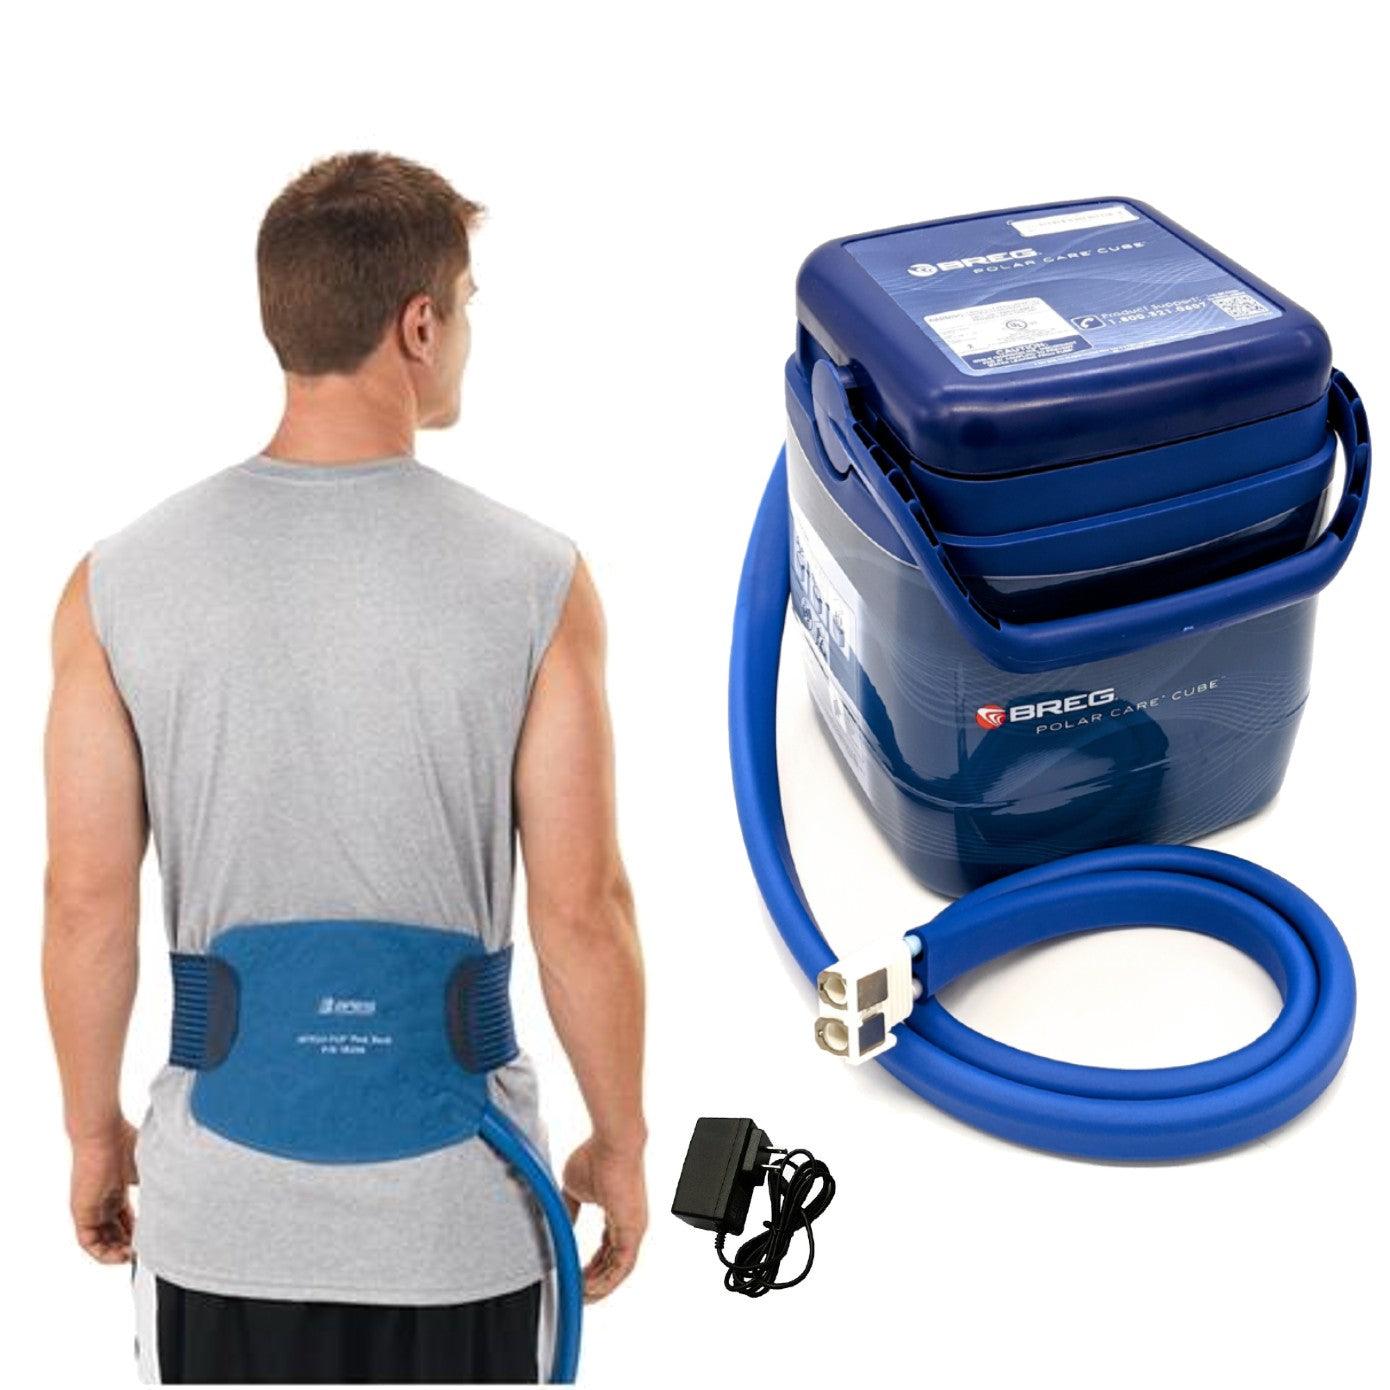 Breg® Polar Care Cube System w/ Wrap-On Pads - 10701-09805 Breg® Polar Care Cube System w/ Wrap-On Pads - undefined by Supply Physical Therapy Breg, Cold Therapy Units, Combos, Cube